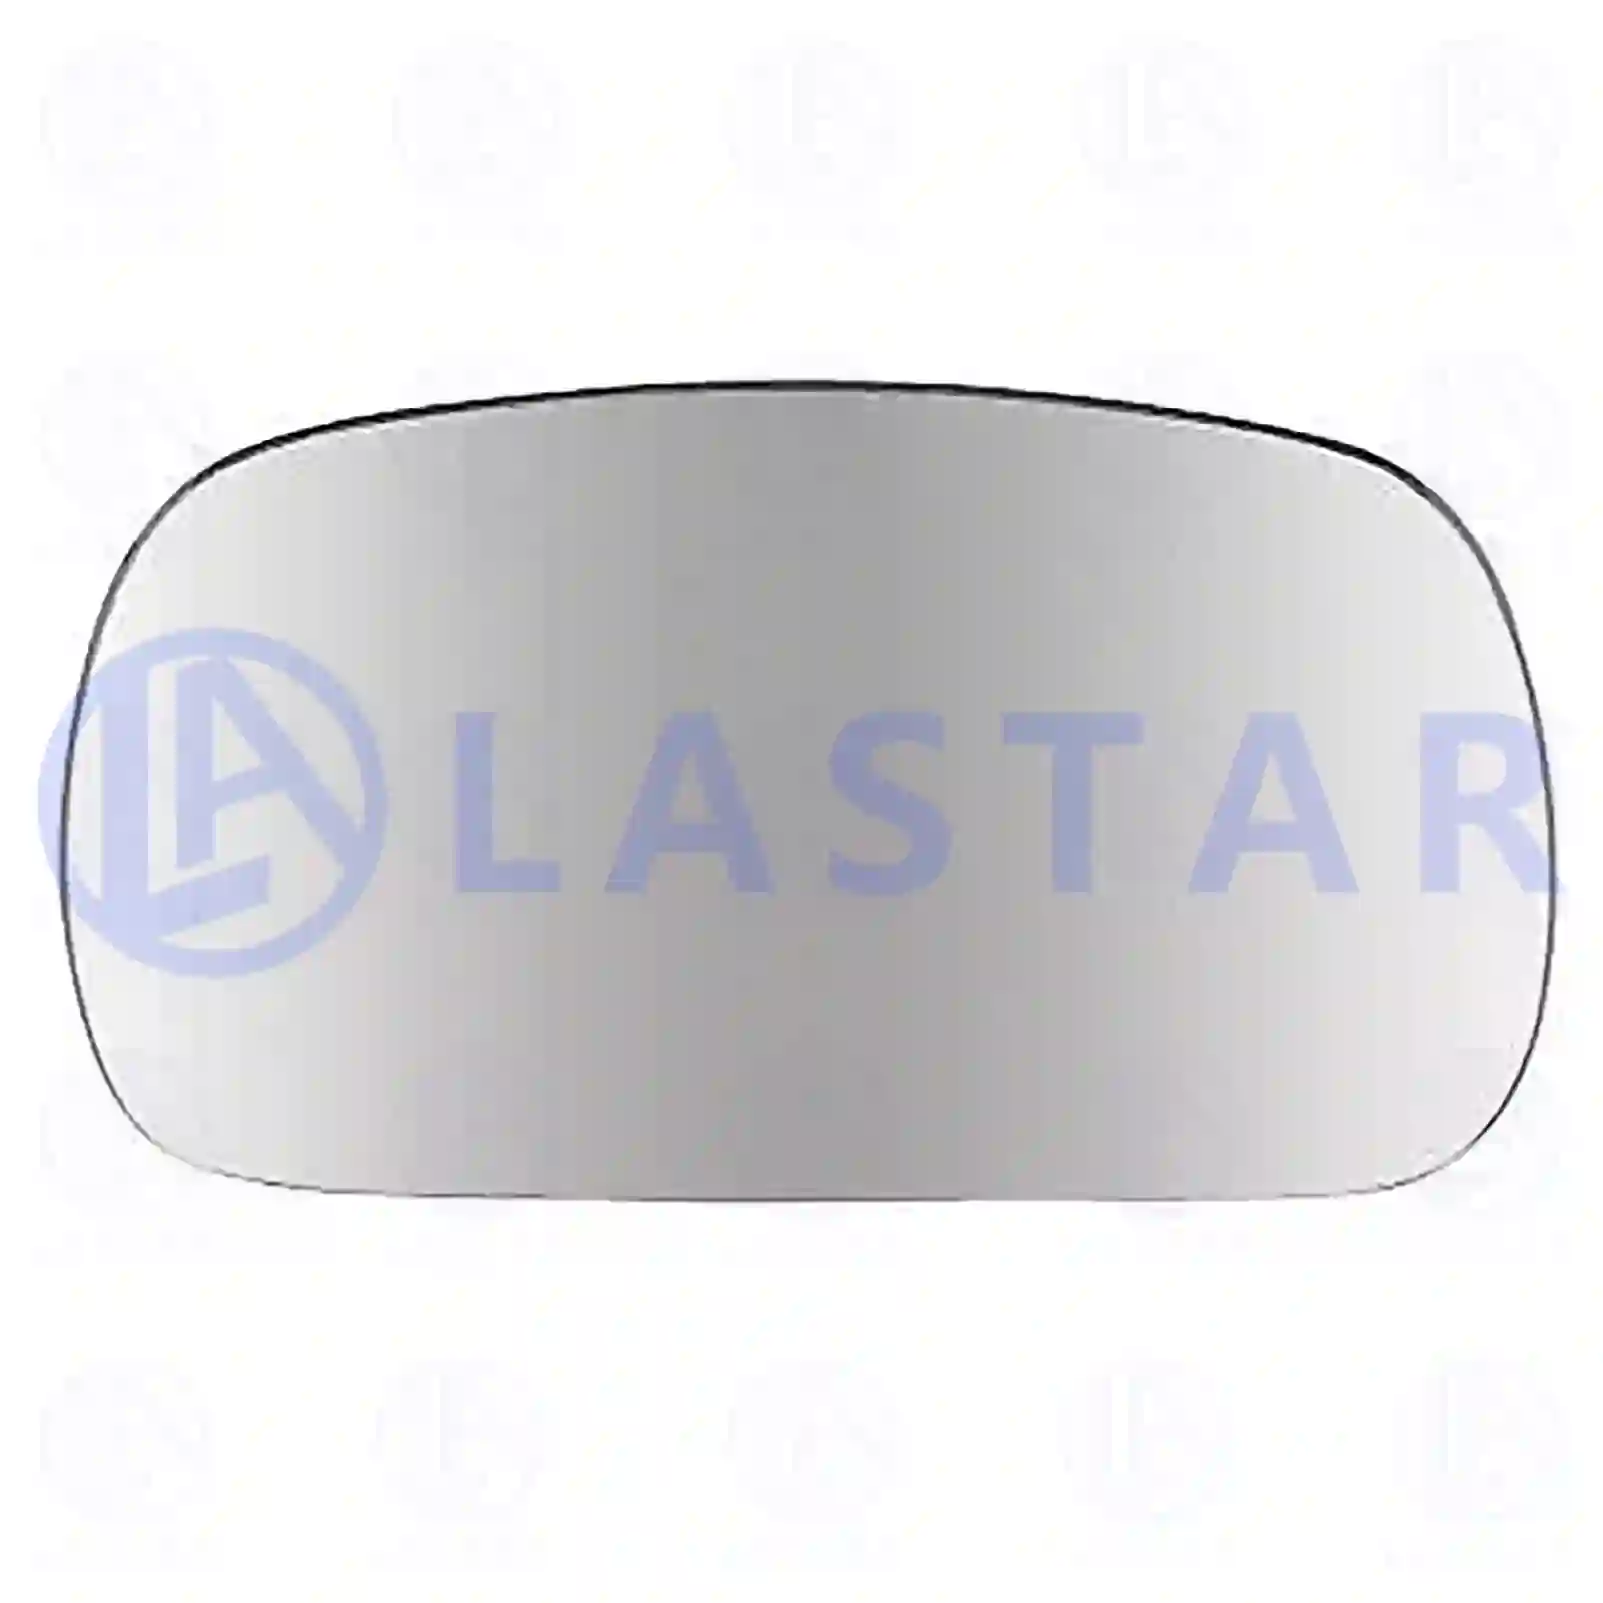 Mirror glass, wide view mirror, 77721418, 296459, 316918, 1697679, ZG61011-0008 ||  77721418 Lastar Spare Part | Truck Spare Parts, Auotomotive Spare Parts Mirror glass, wide view mirror, 77721418, 296459, 316918, 1697679, ZG61011-0008 ||  77721418 Lastar Spare Part | Truck Spare Parts, Auotomotive Spare Parts